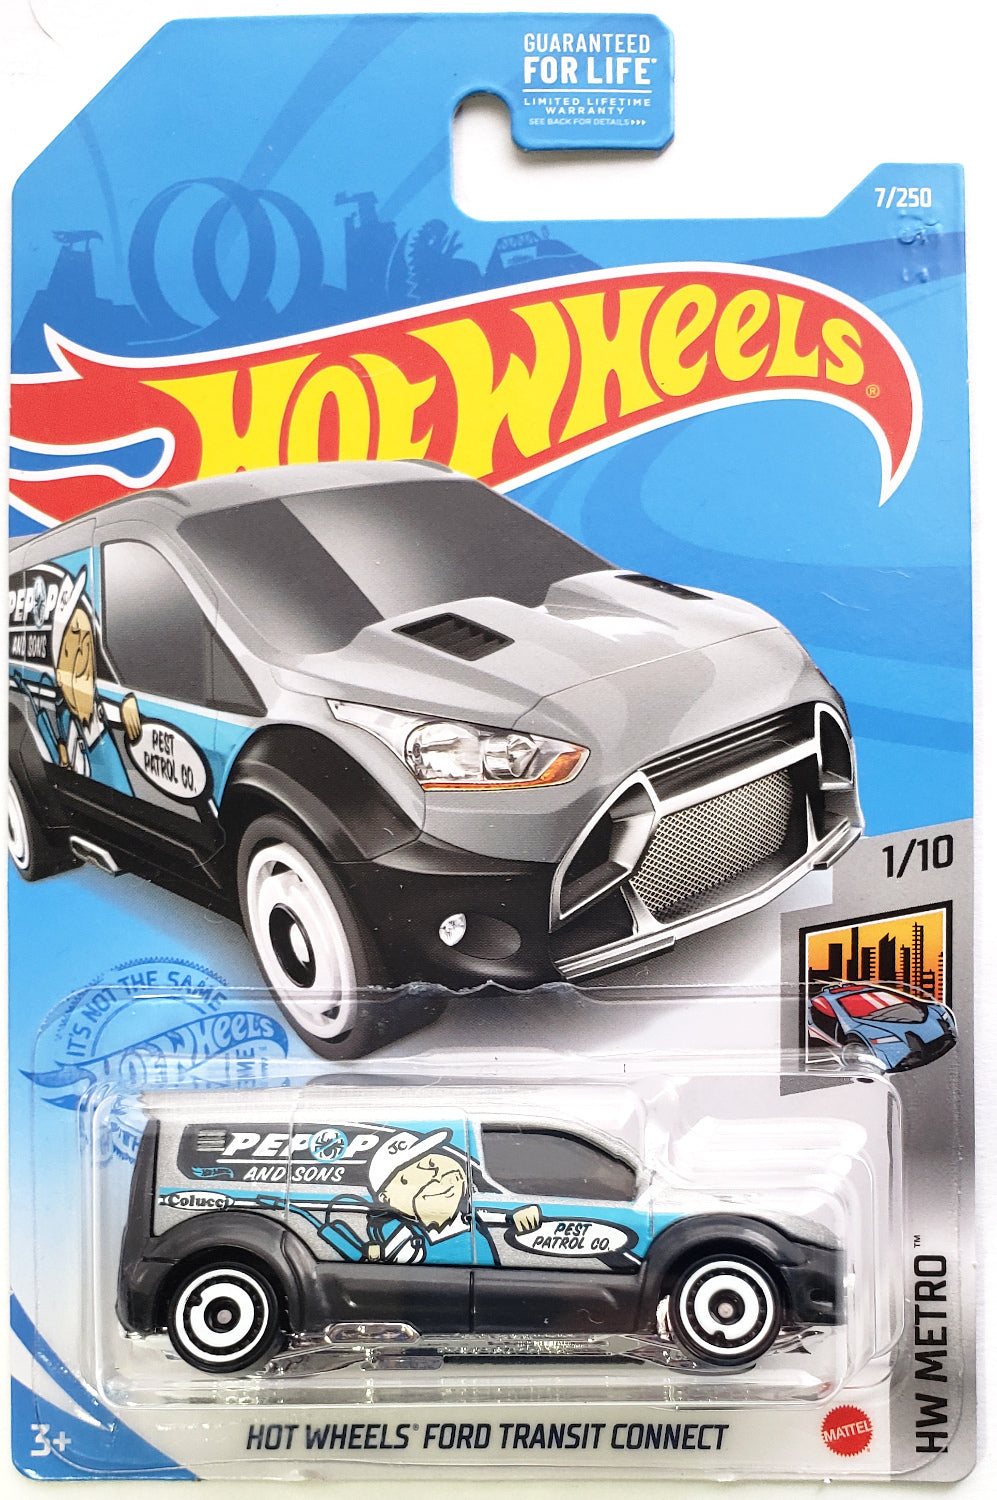 Hot Wheels 2021 - Collector # 007/250 - HW Metro 1/10 - Hot Wheels Ford Transit Connect - Gray / Pest Contro